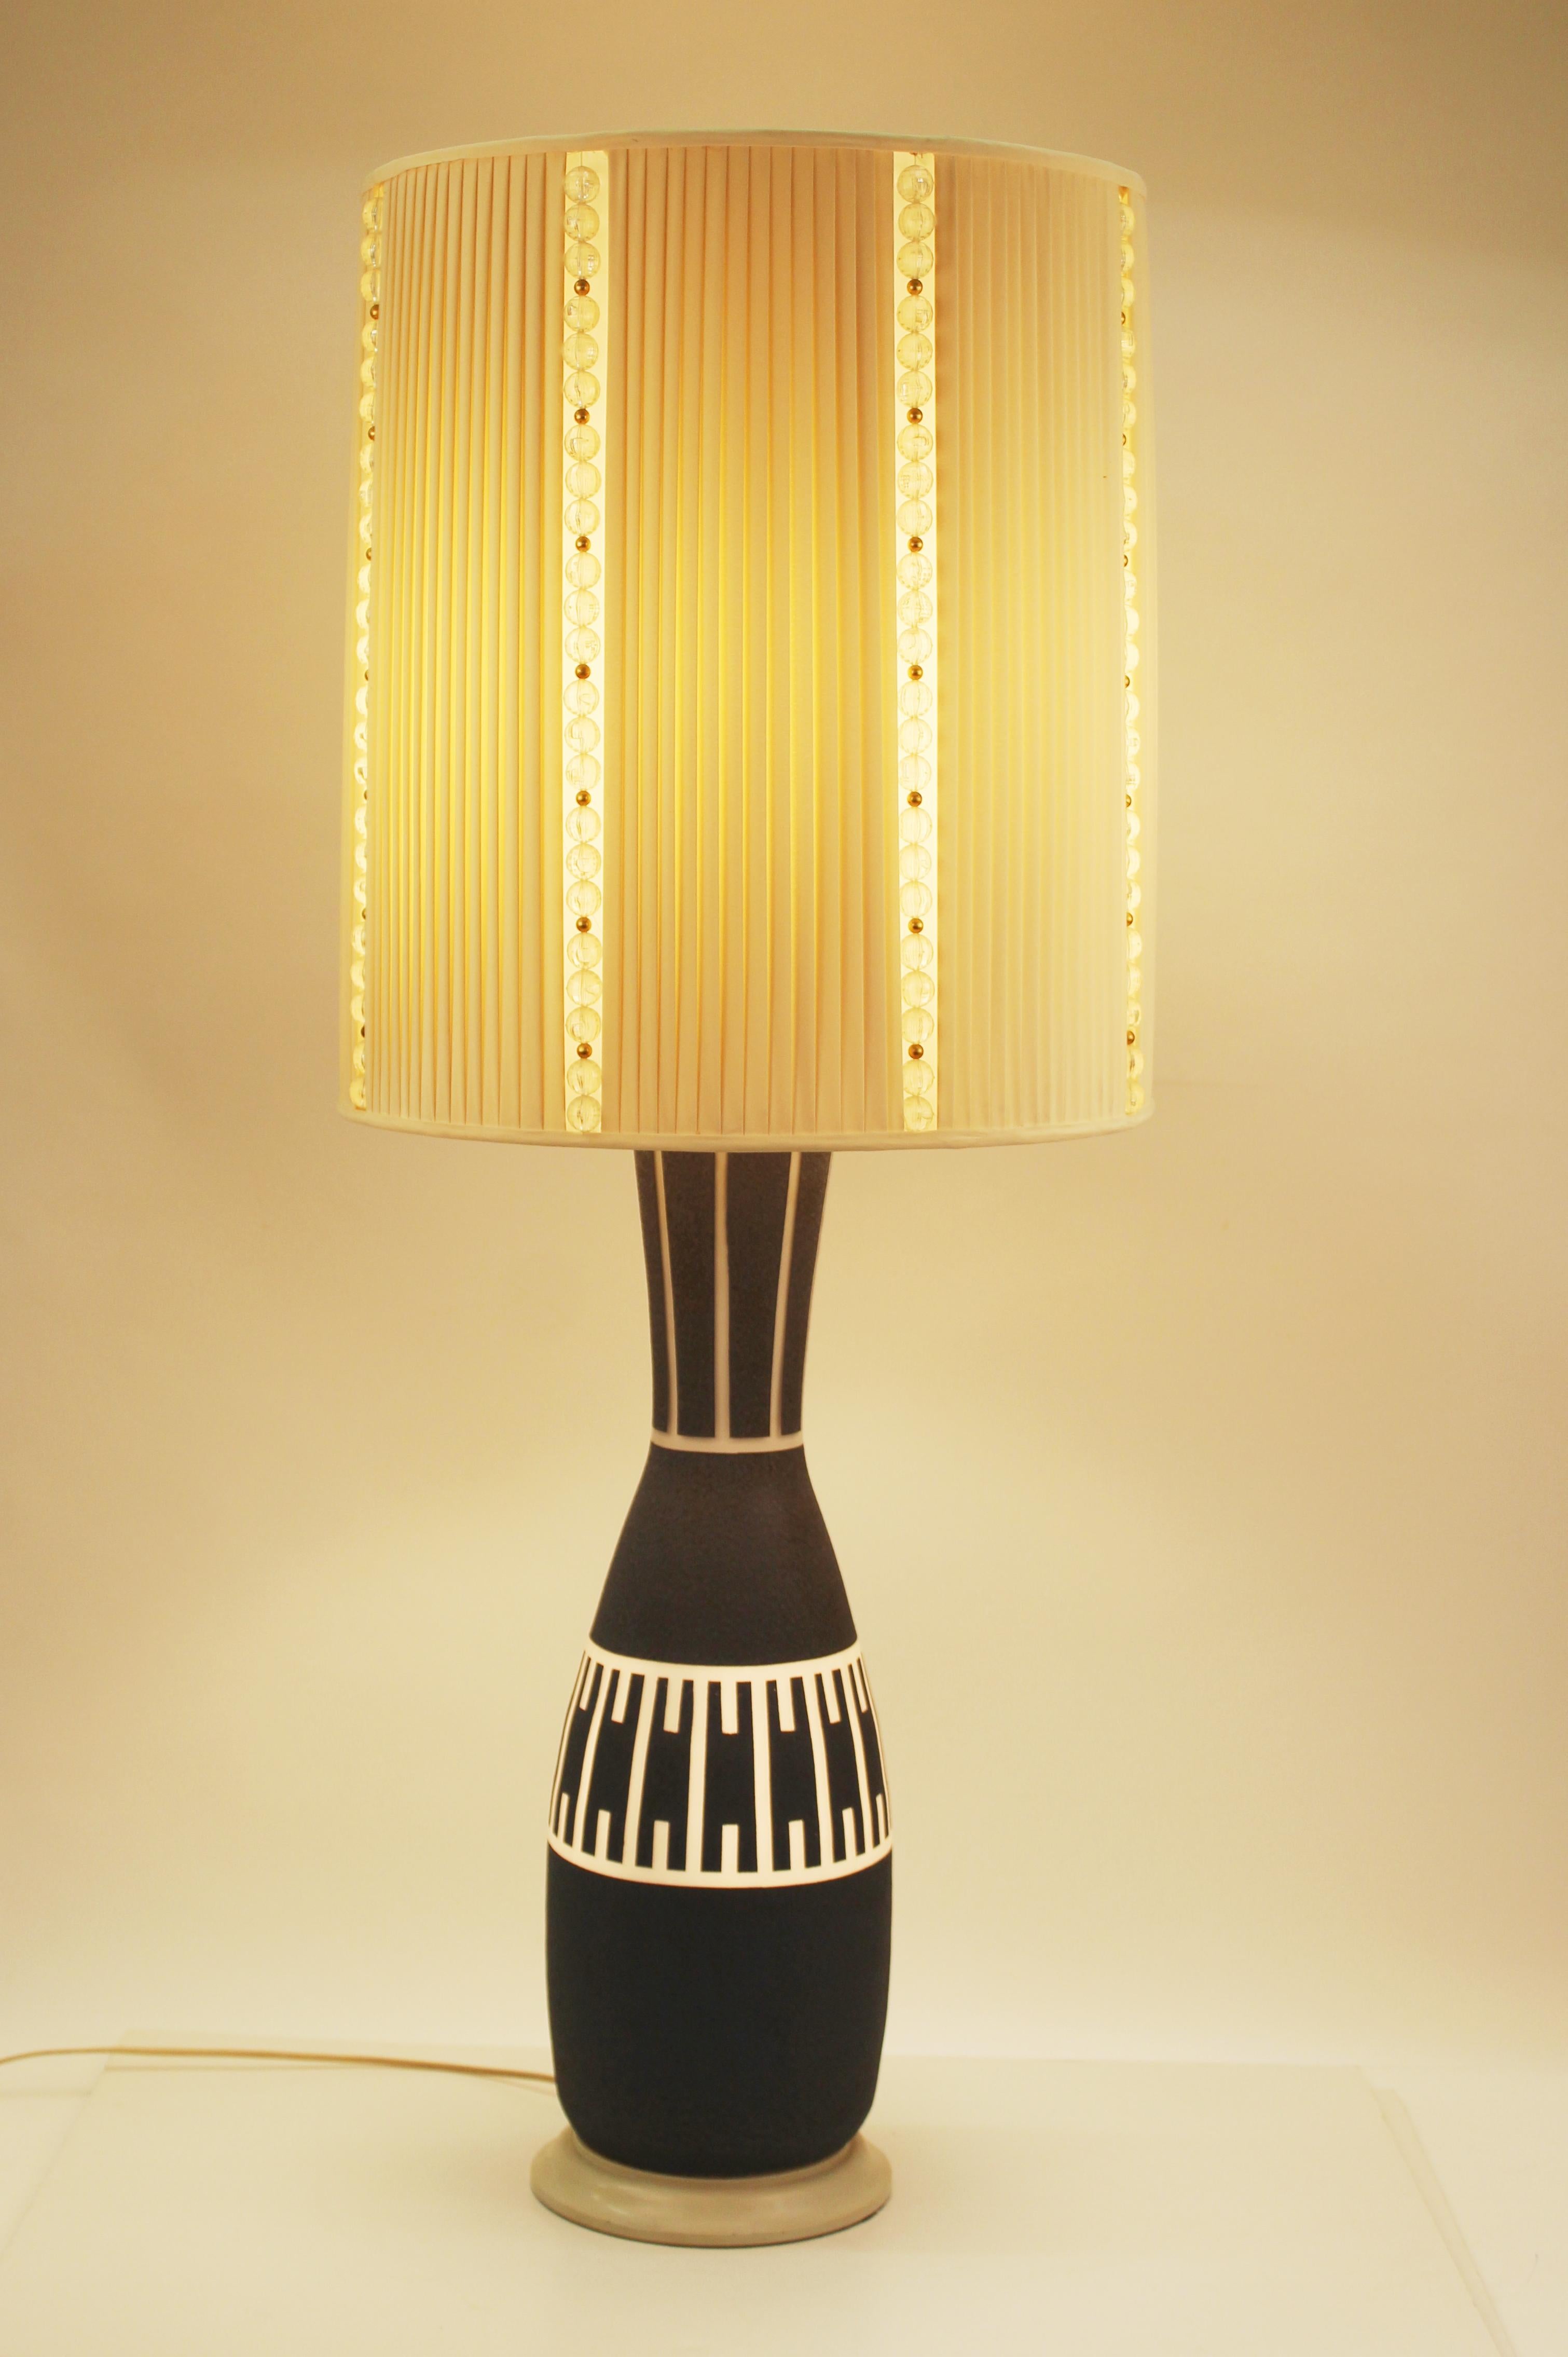 American Mid-Century Modern Table Lamps with Illuminated Base in Blue and Milk Glass